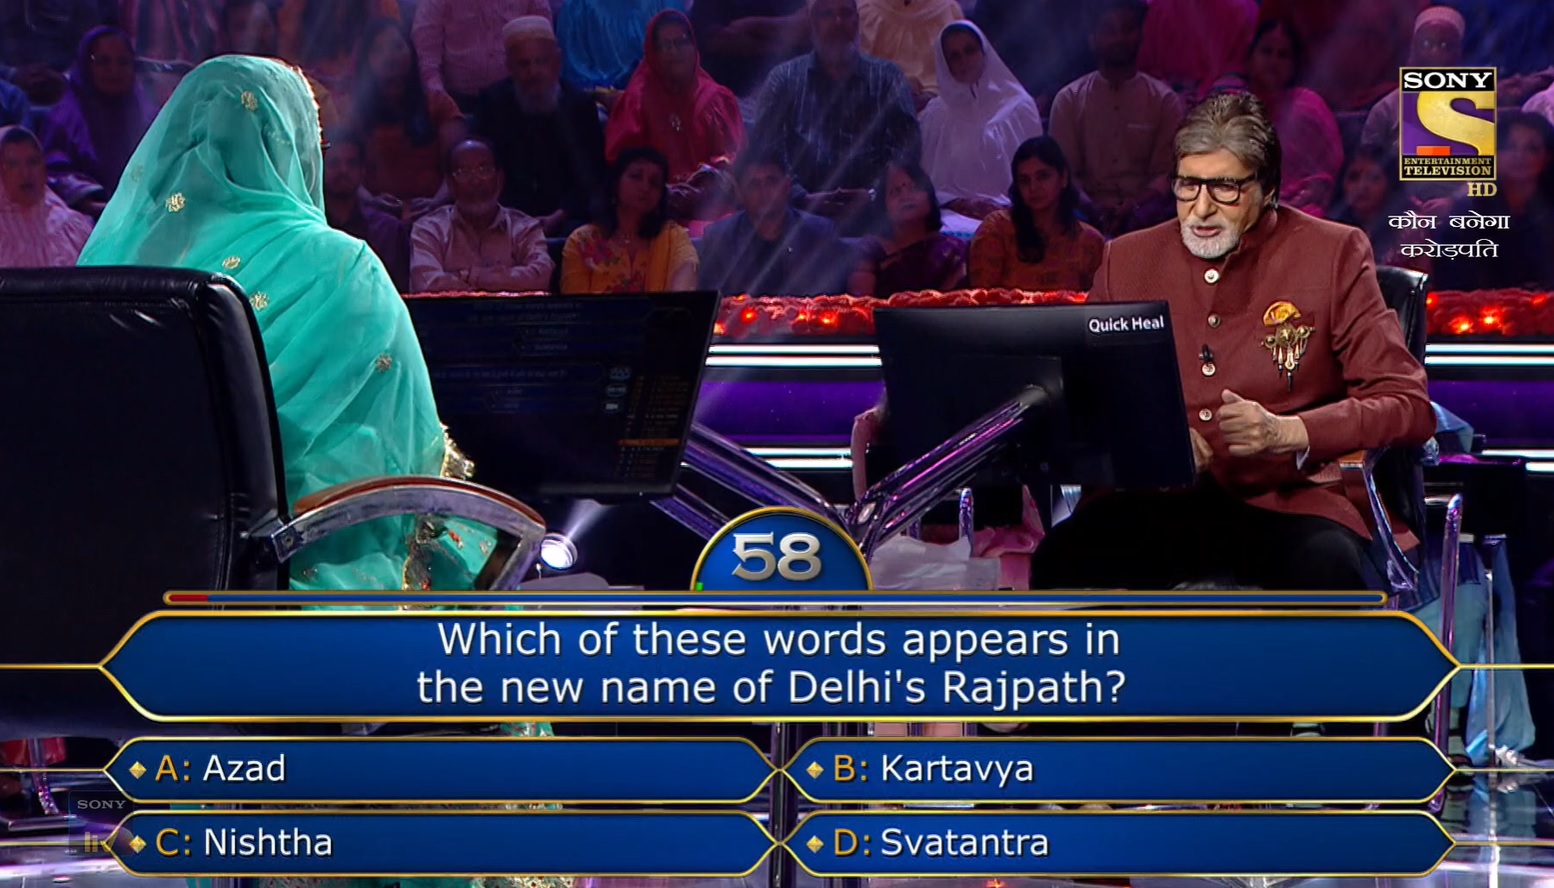 Ques : Which of these words appears in the new name of Delhi’s Rajpath?